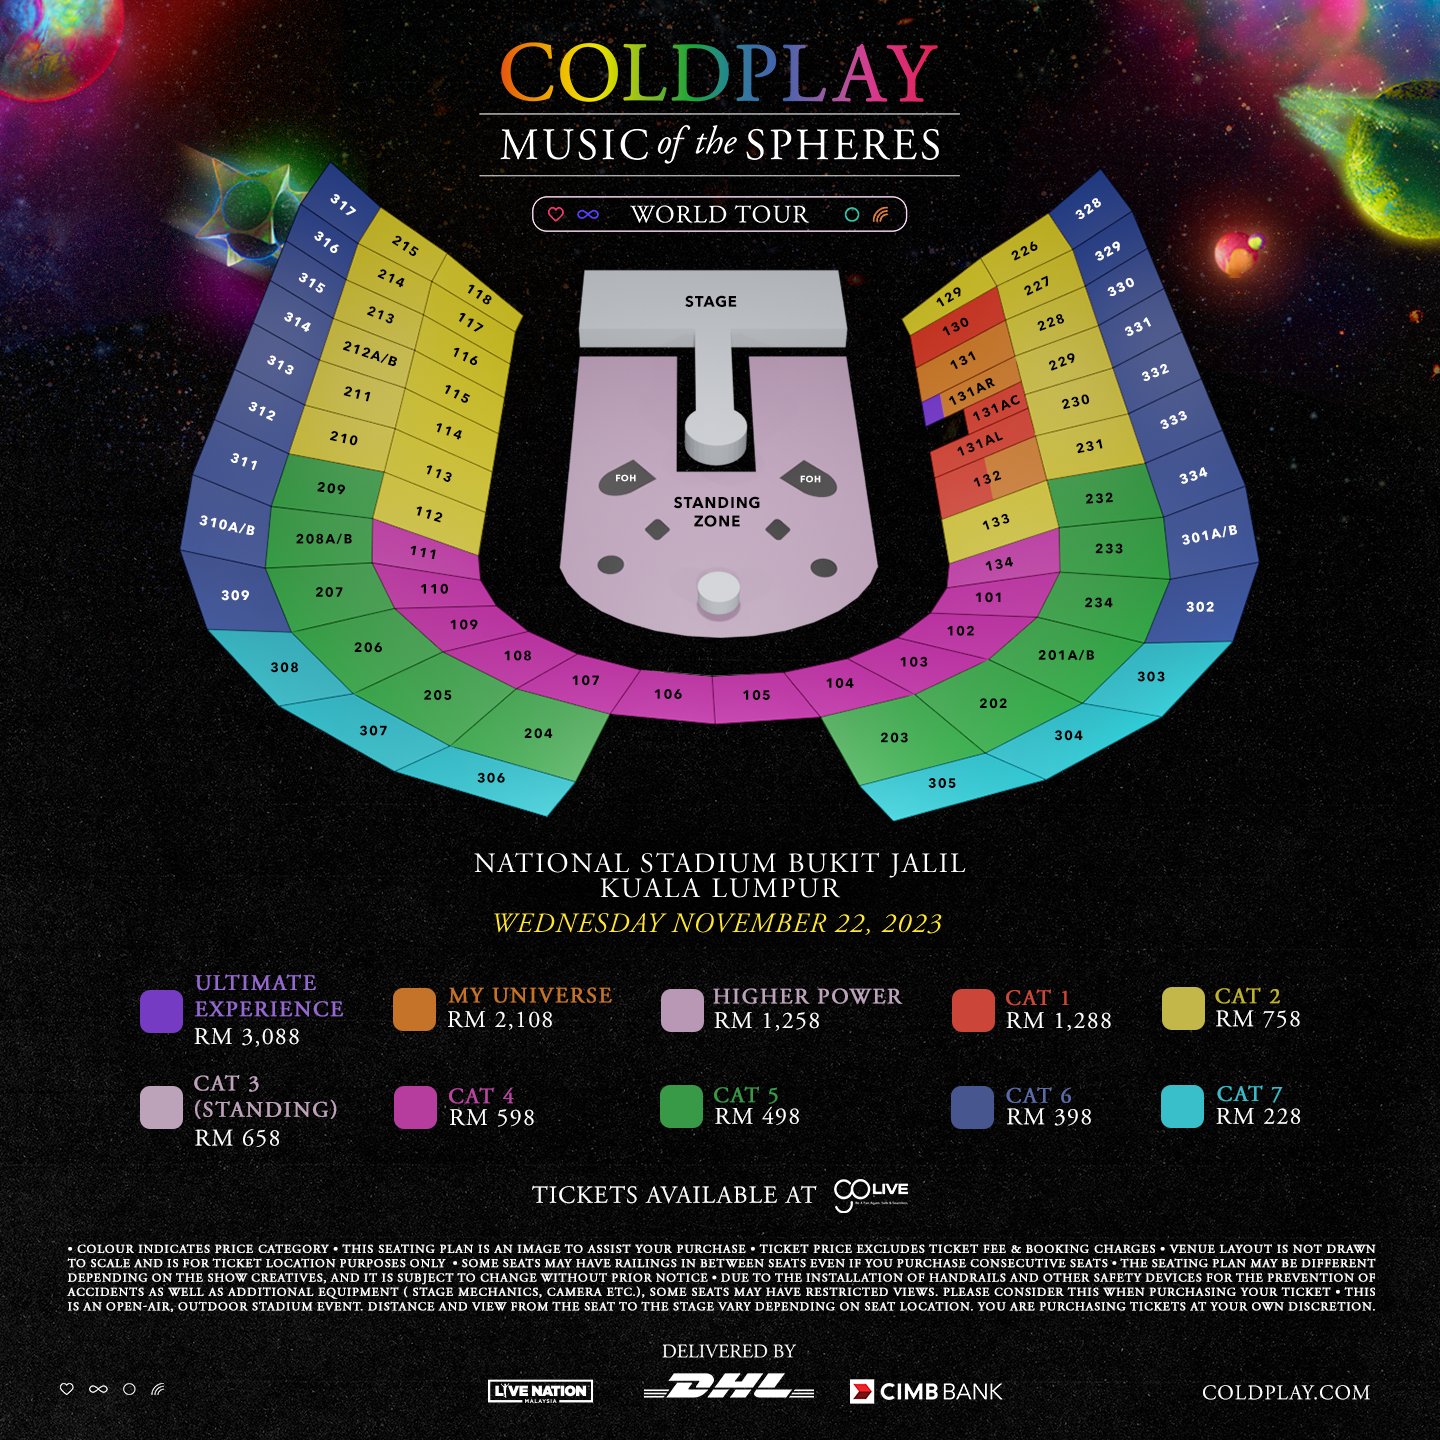 Coldplay To Hold Malaysia Concert For The First Time On 22nd November